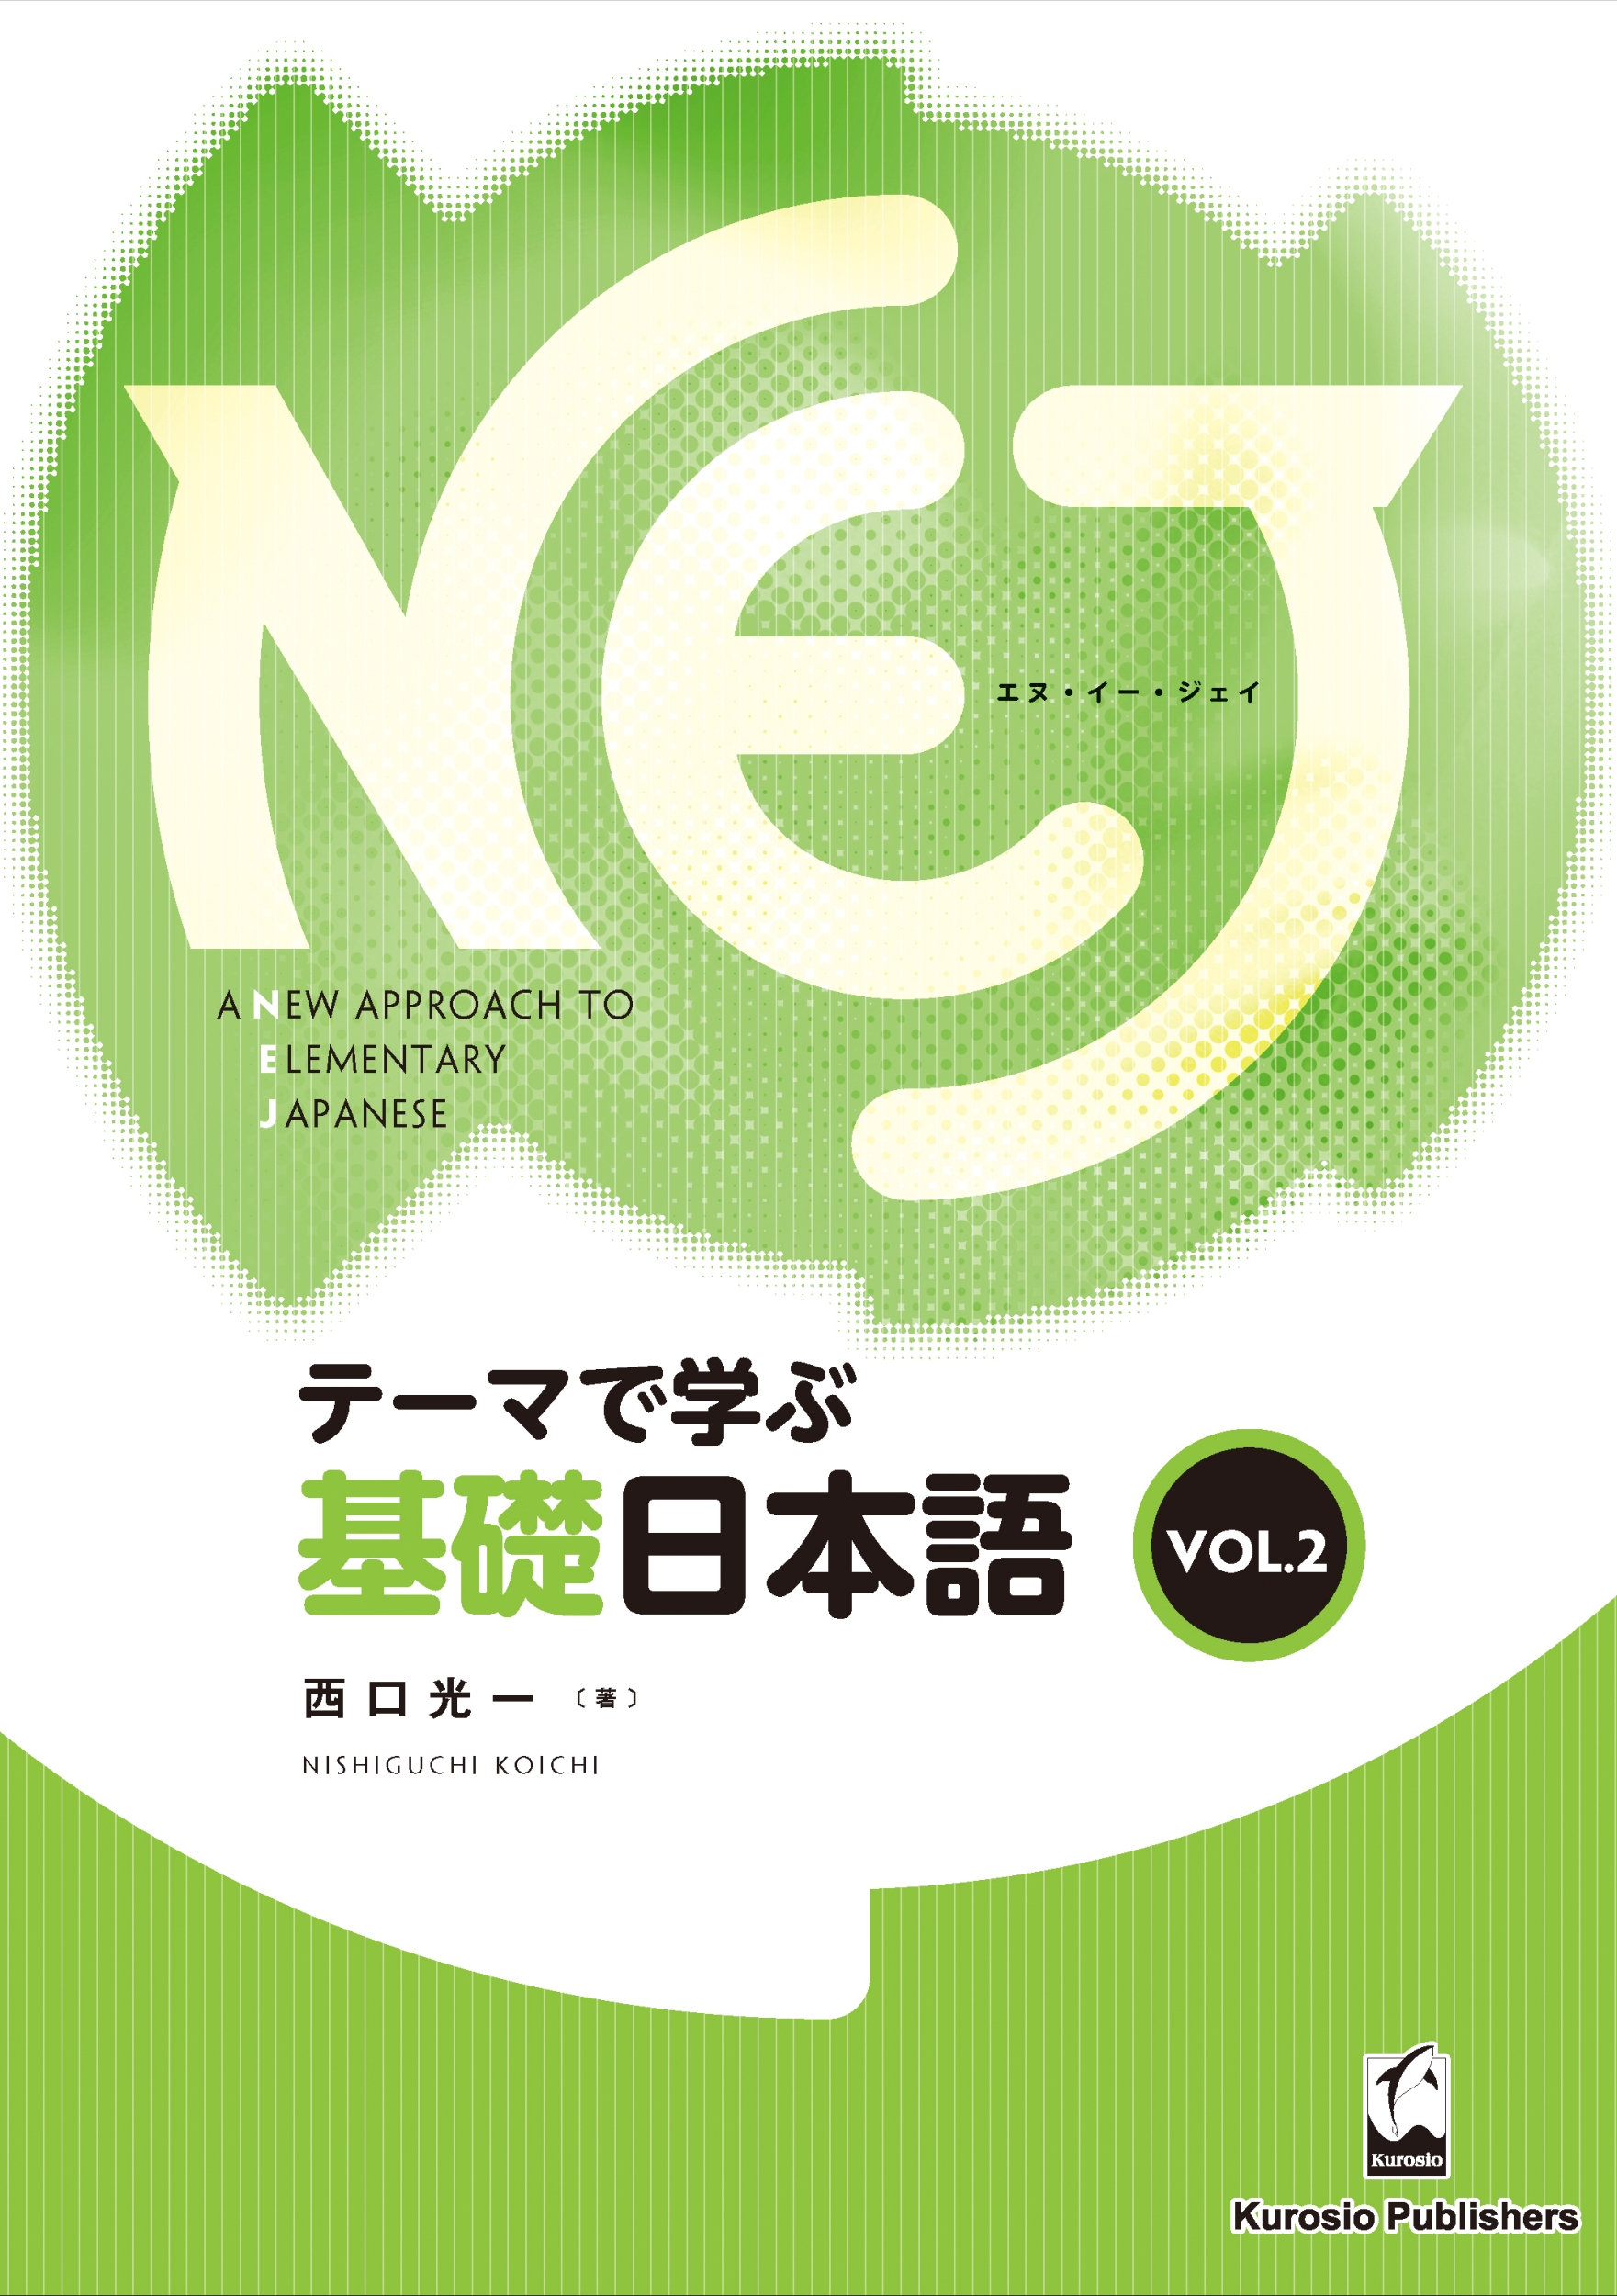 NEJ: A New Approach to Elementary Japanese 2の商品画像